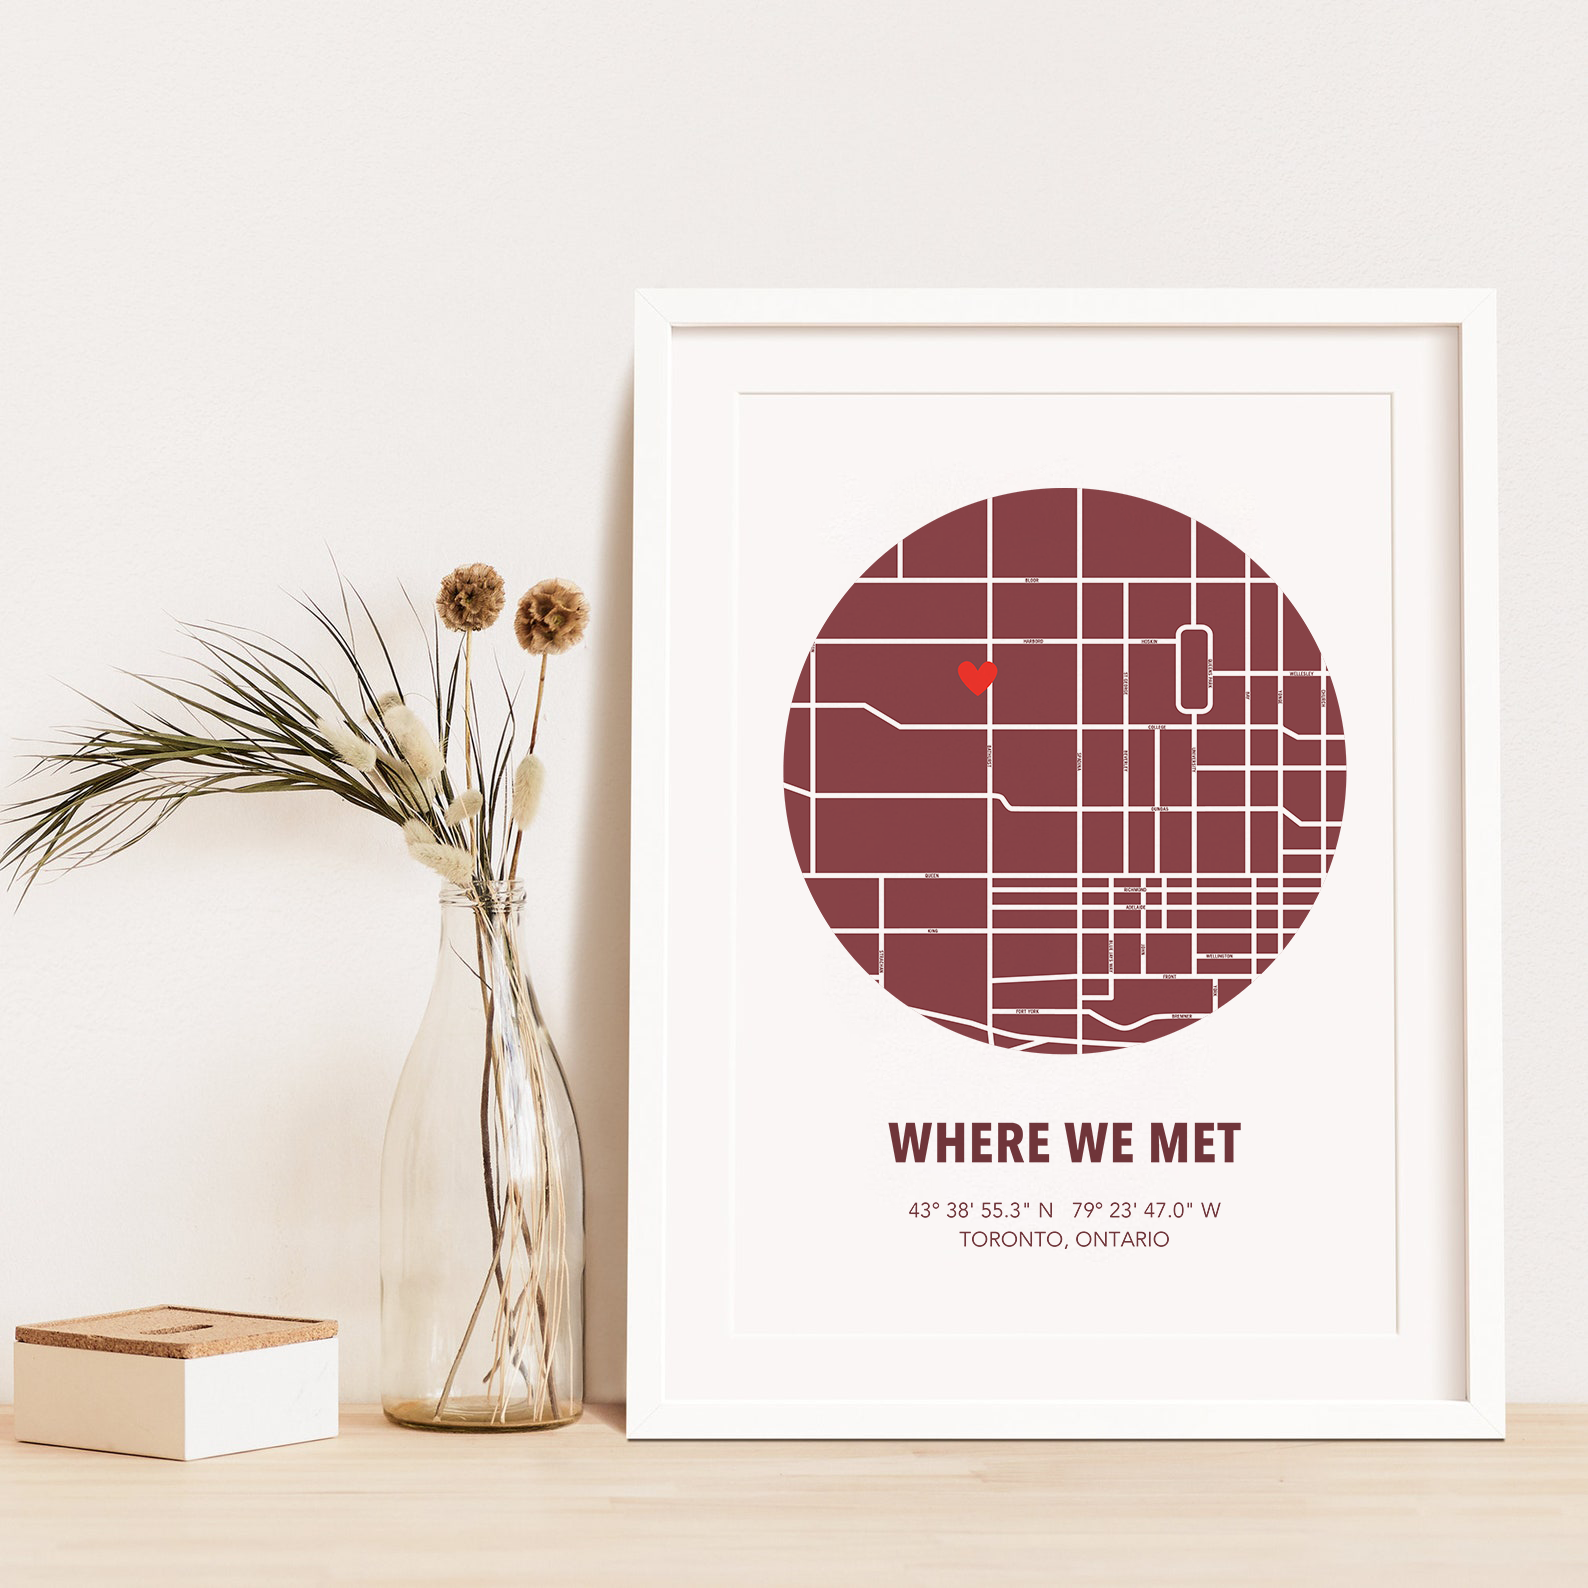 Image of map in a maroon circle with type below that says Where We Met and coordinates on the next line. Frame is placed on a wood surface beside a decorative plant in a clear bottle. 